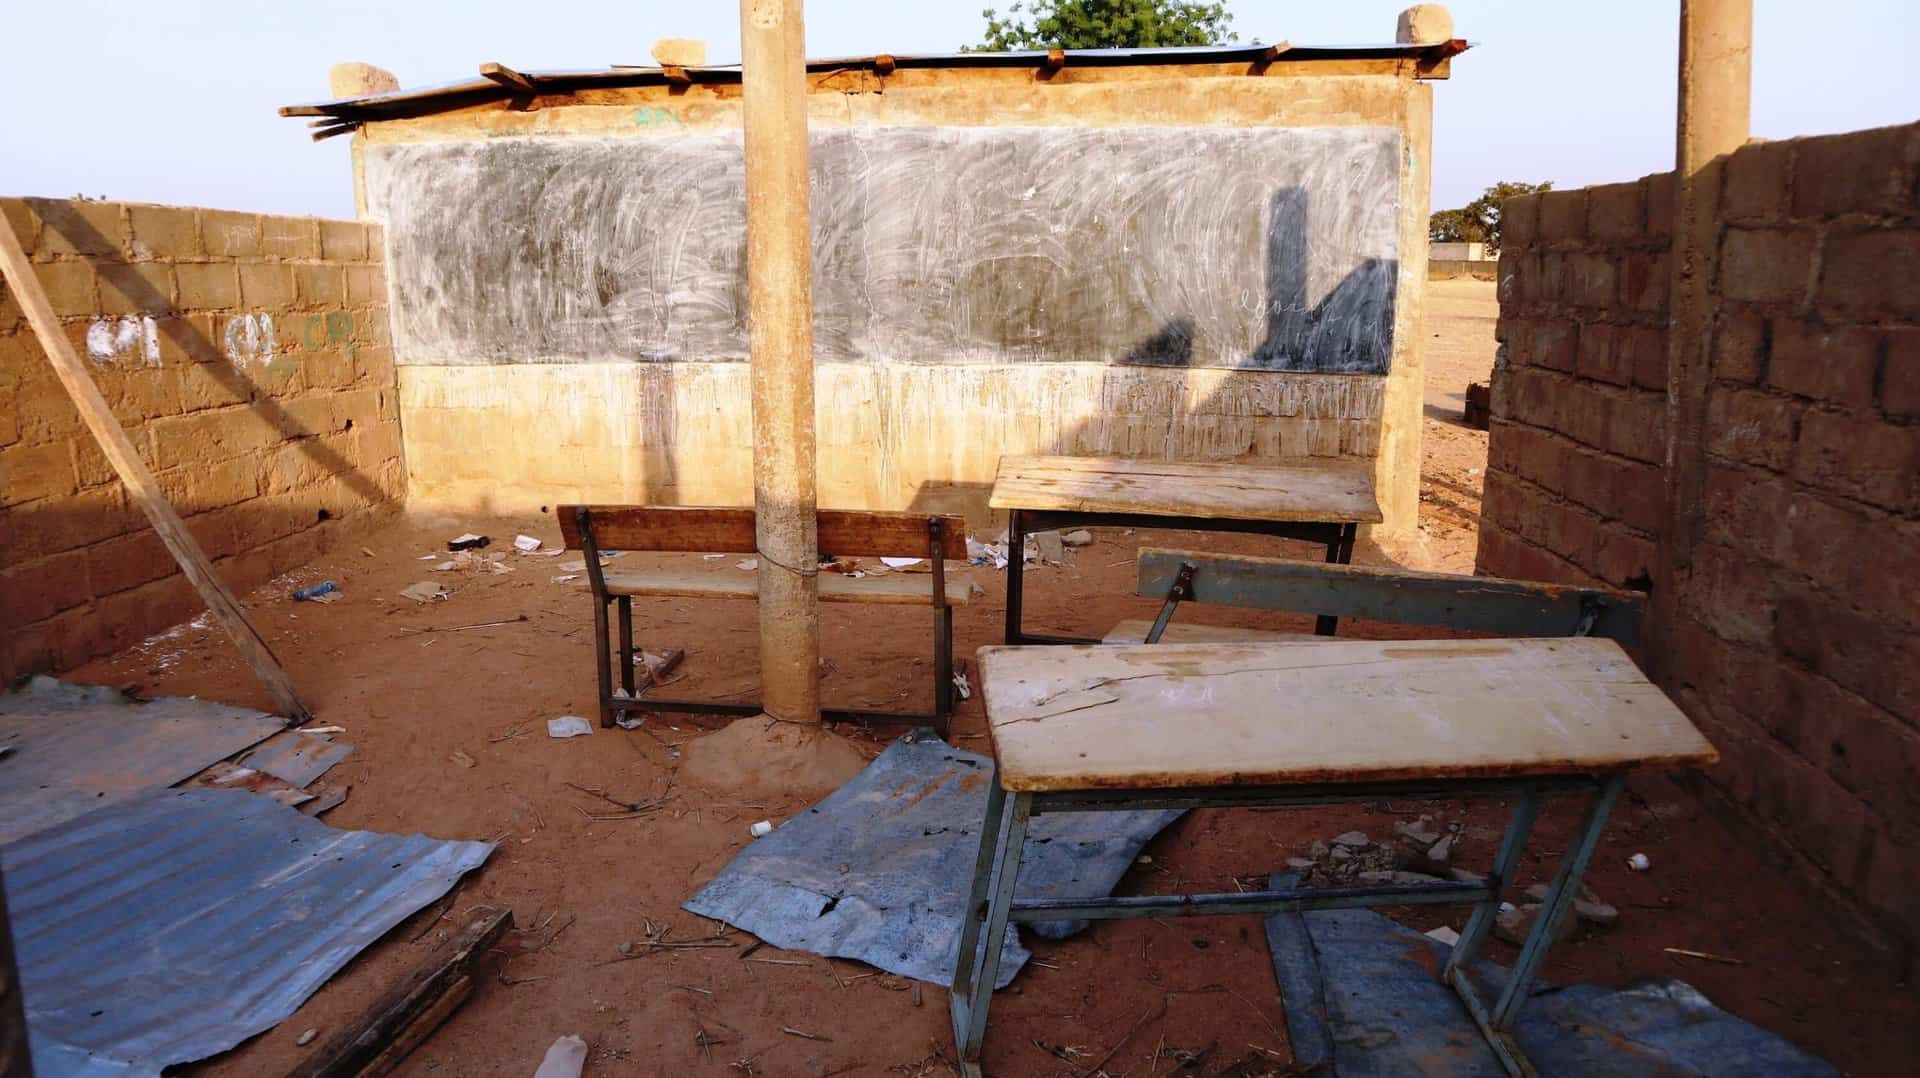 Aide et Action is concerned about the closure of schools in Burkina Faso due to the terrorist threat